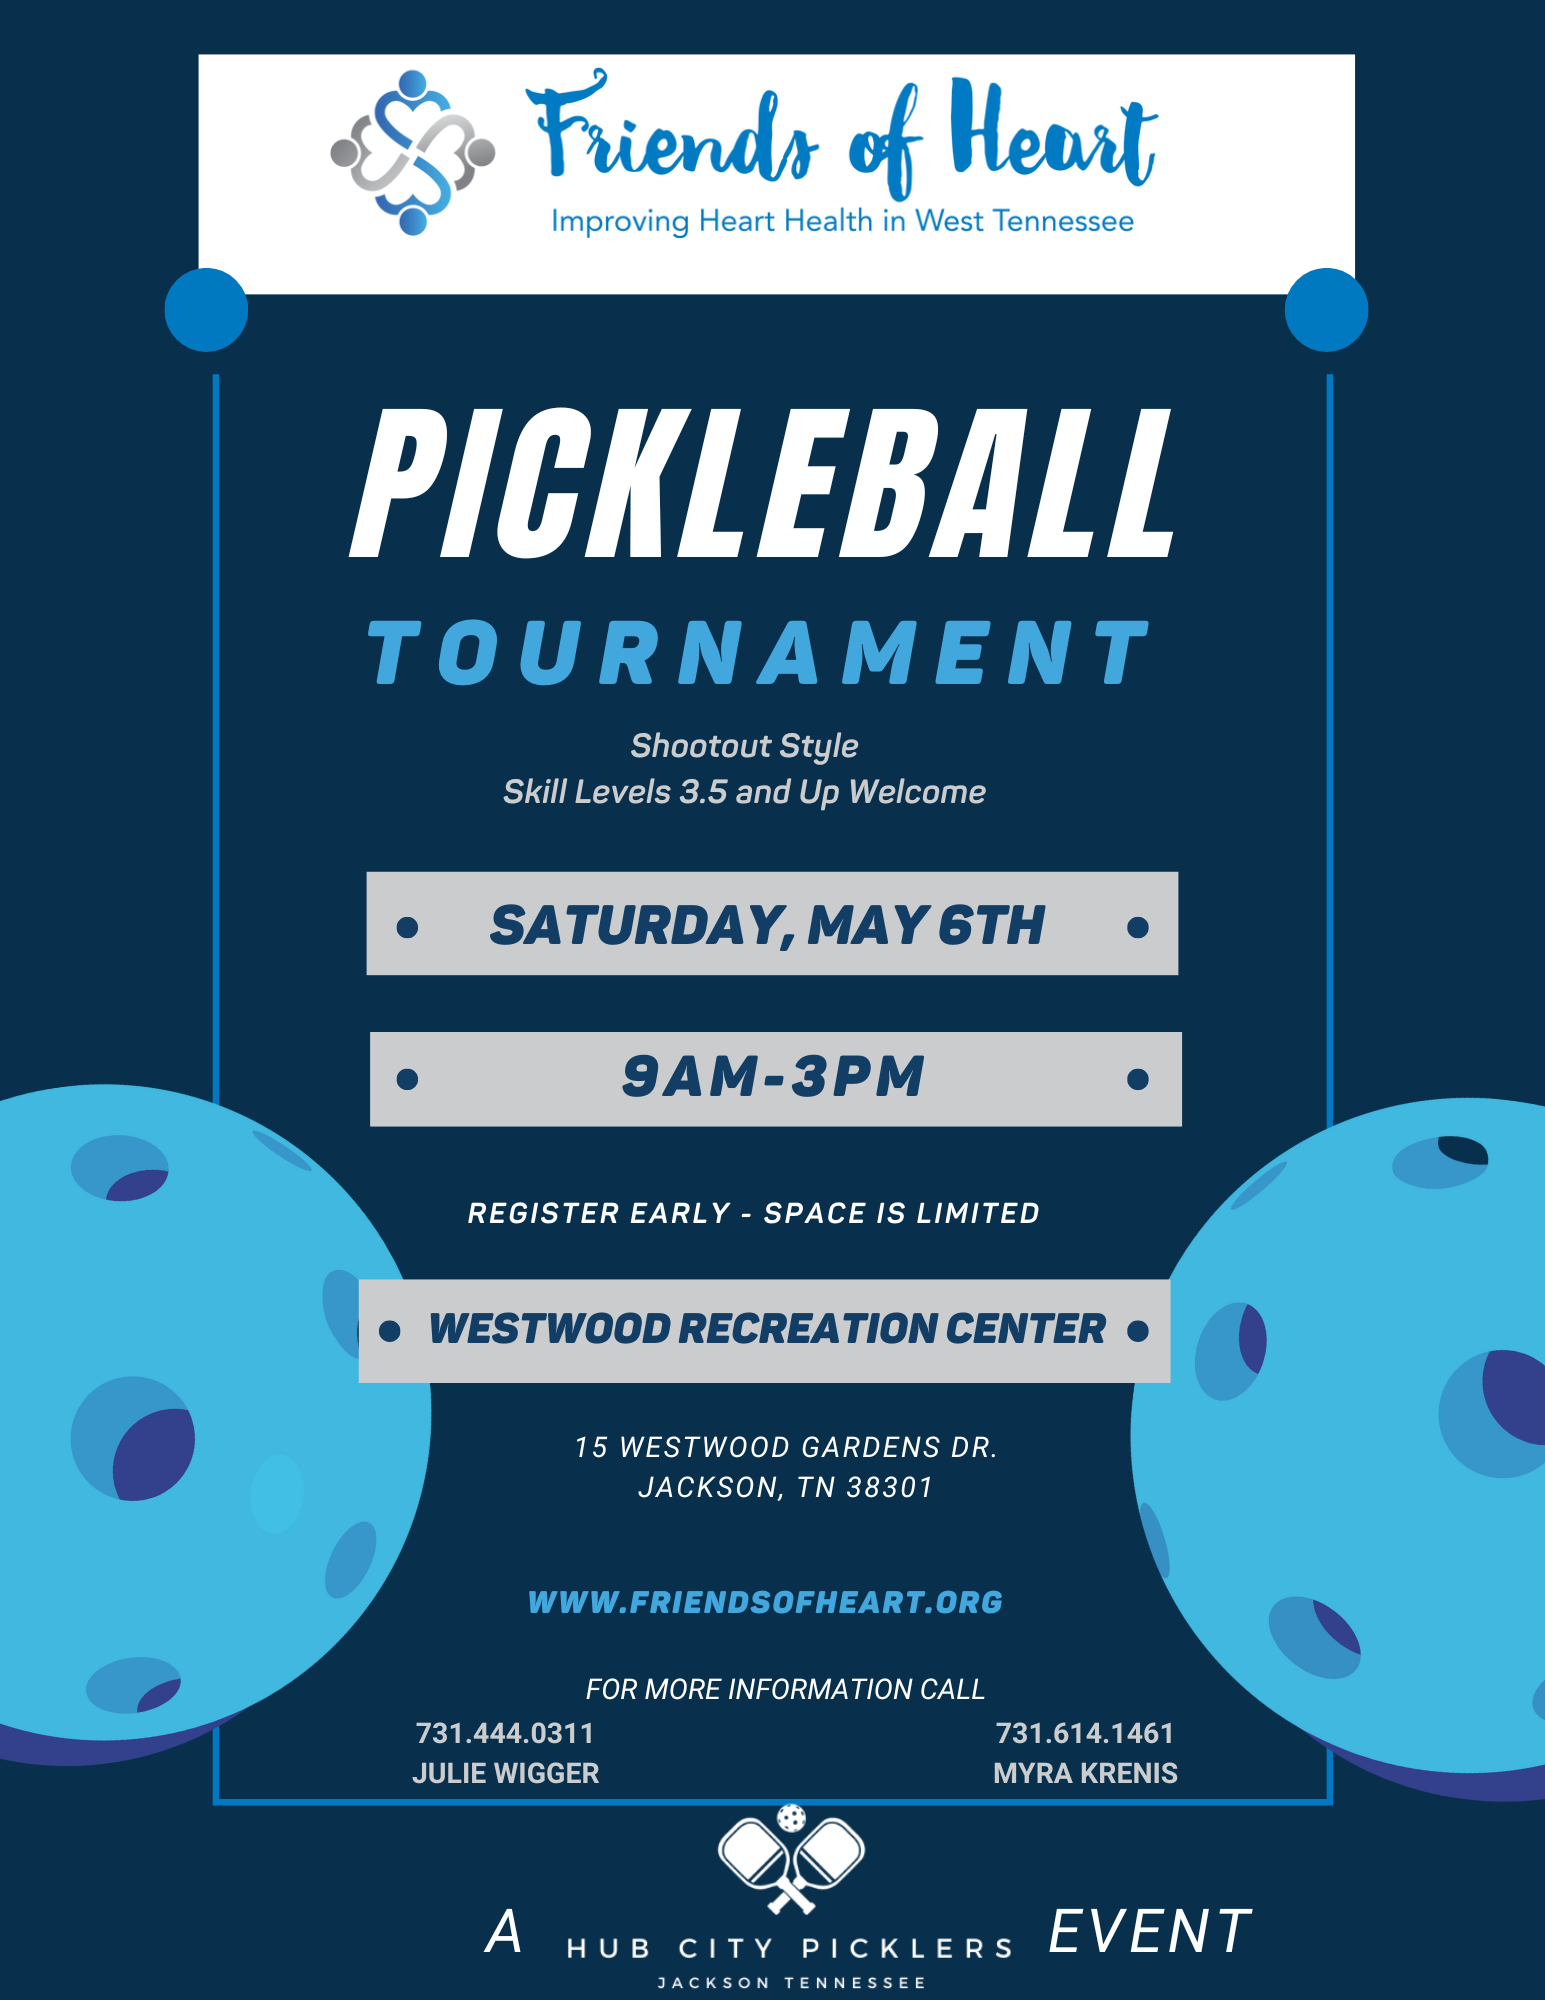 https://www.friendsofheart.org/images/uploads/content_images/FOH_Pickleball_Tournament_Flyer_%288.5_%C3%97_11_in%29-4_.pngFriends of Heart Pickleball Tournament{/three_phots:file}